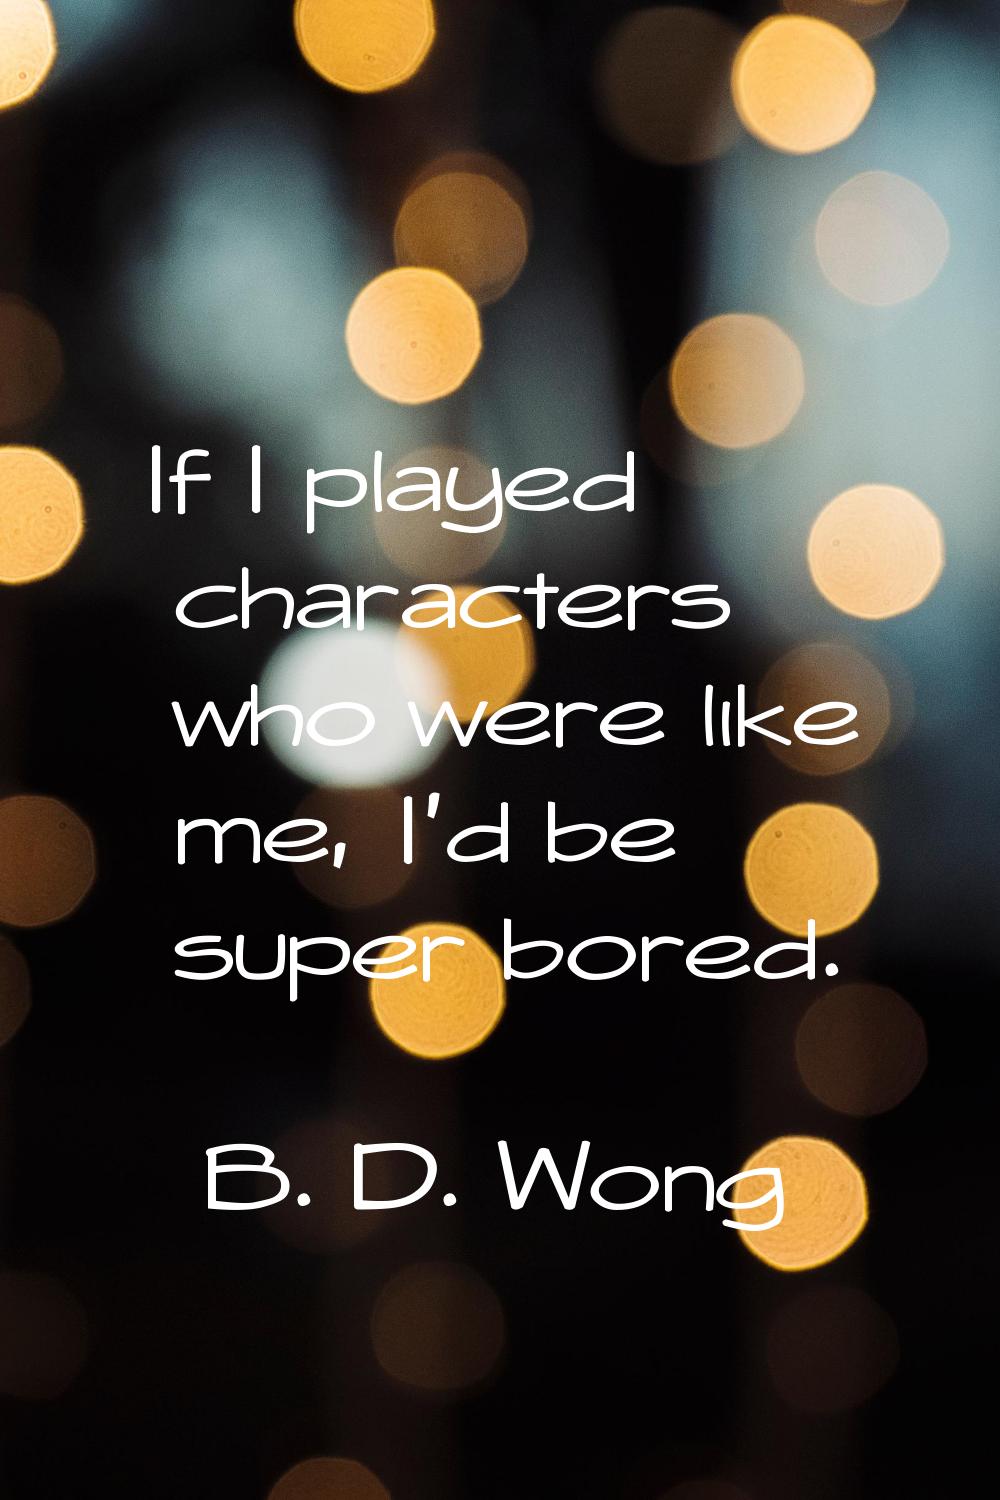 If I played characters who were like me, I'd be super bored.